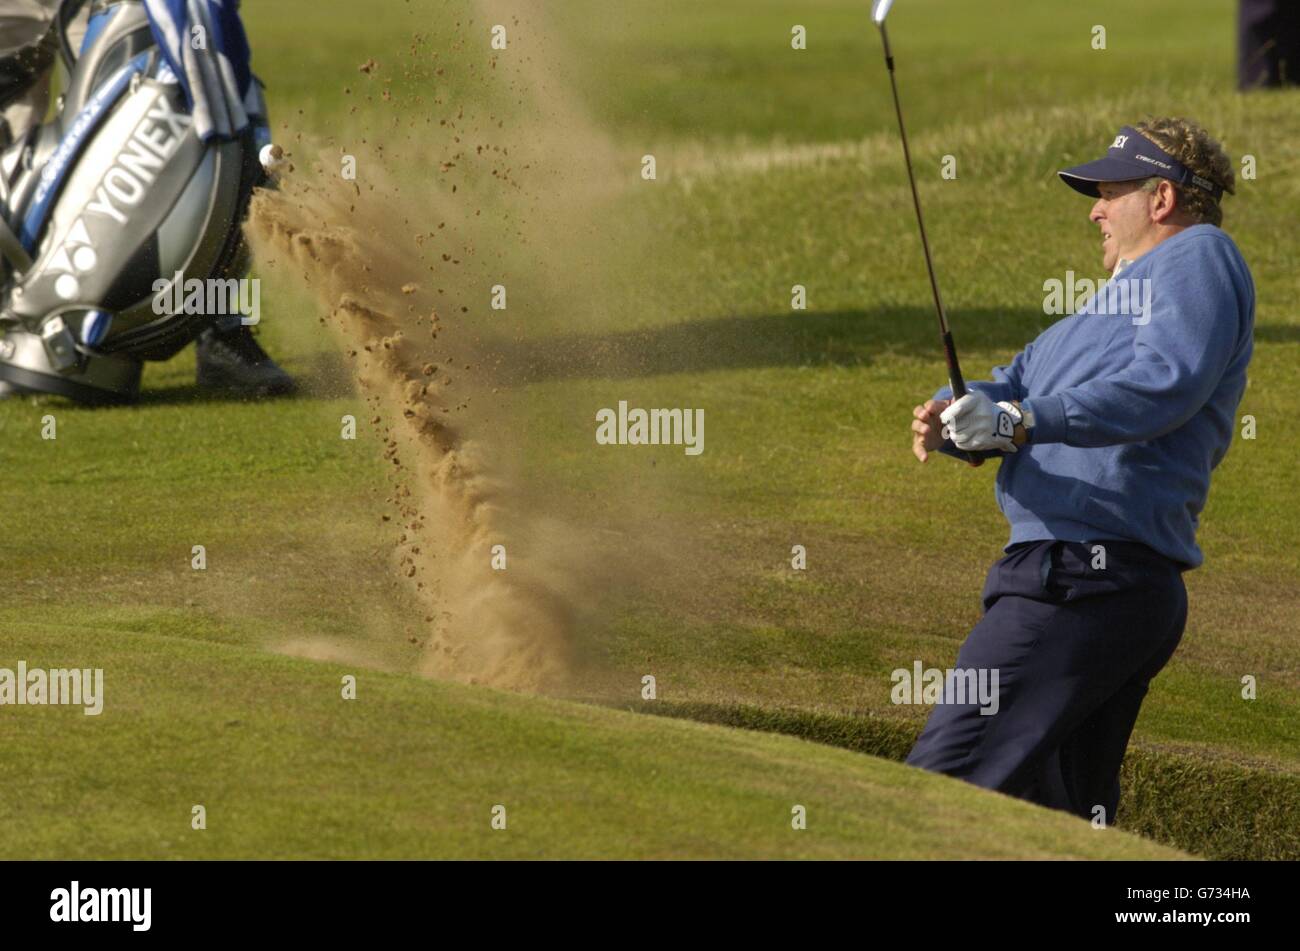 Scotland's Colin Montgomerie falls in the bunker on the 14th hole after playing his shot during The 133rd Open Golf Chamionship at the Royal Troon golf course in Scotland , NO MOBILE PHONE USE. Stock Photo